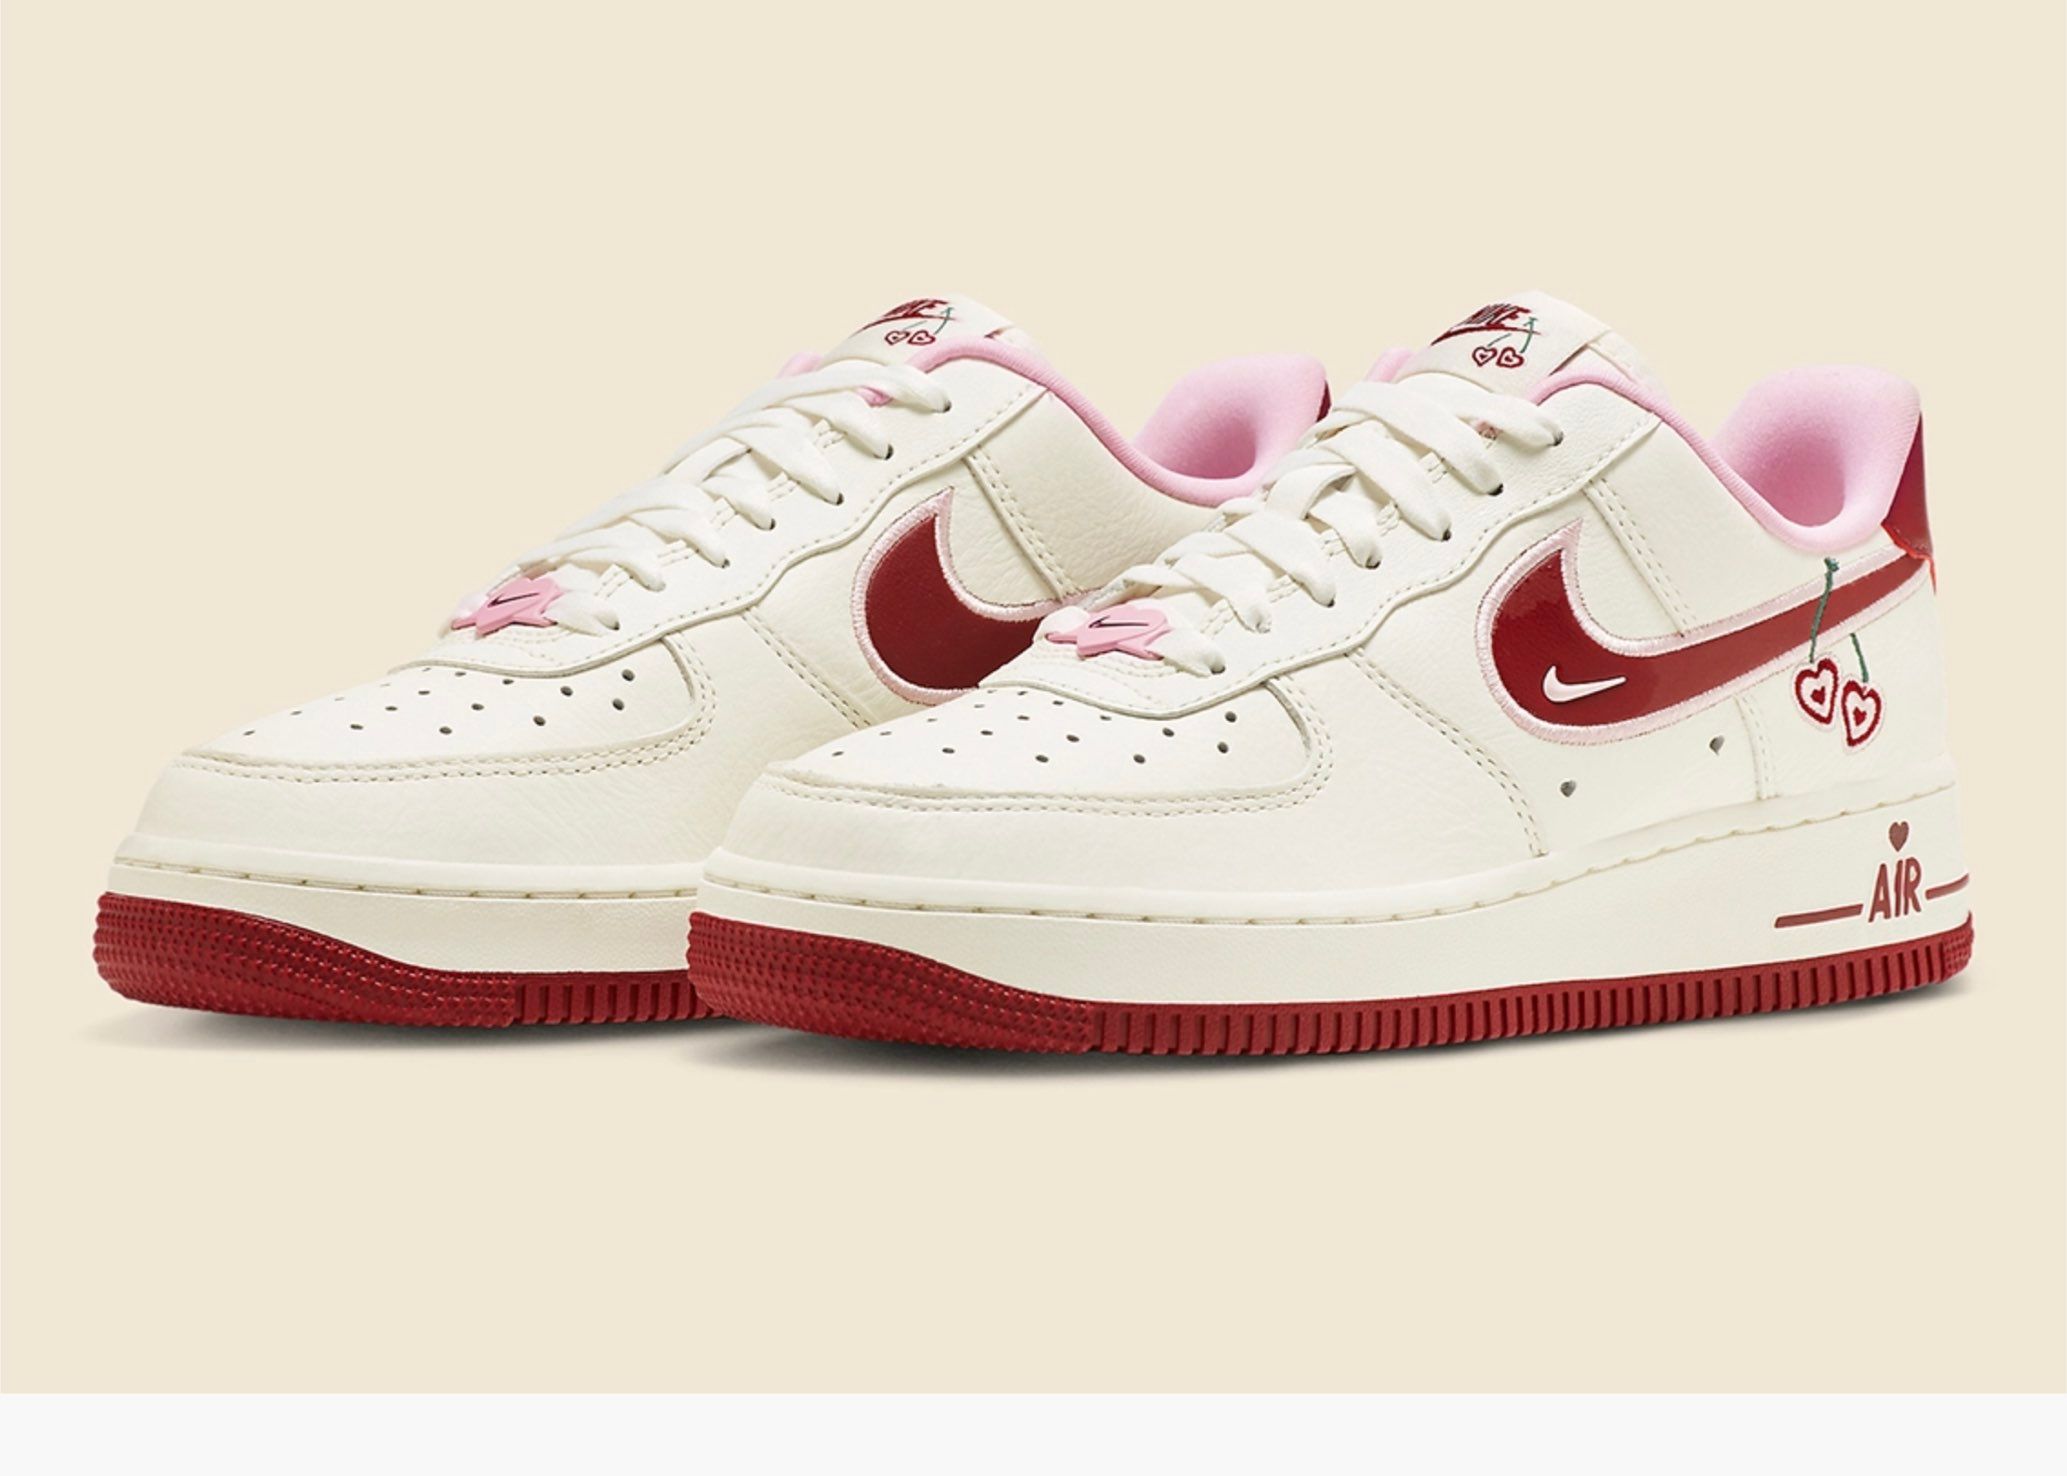 Air force 1 low valentine s day. Nike Air Force 1 Low “Valentine’s Day” 2023. Nike Air Force 1 Low Valentine s Day 2023. Nike Air Force 1 Valentine's Day 2023. Nike Air Force Valentines Day 2023.